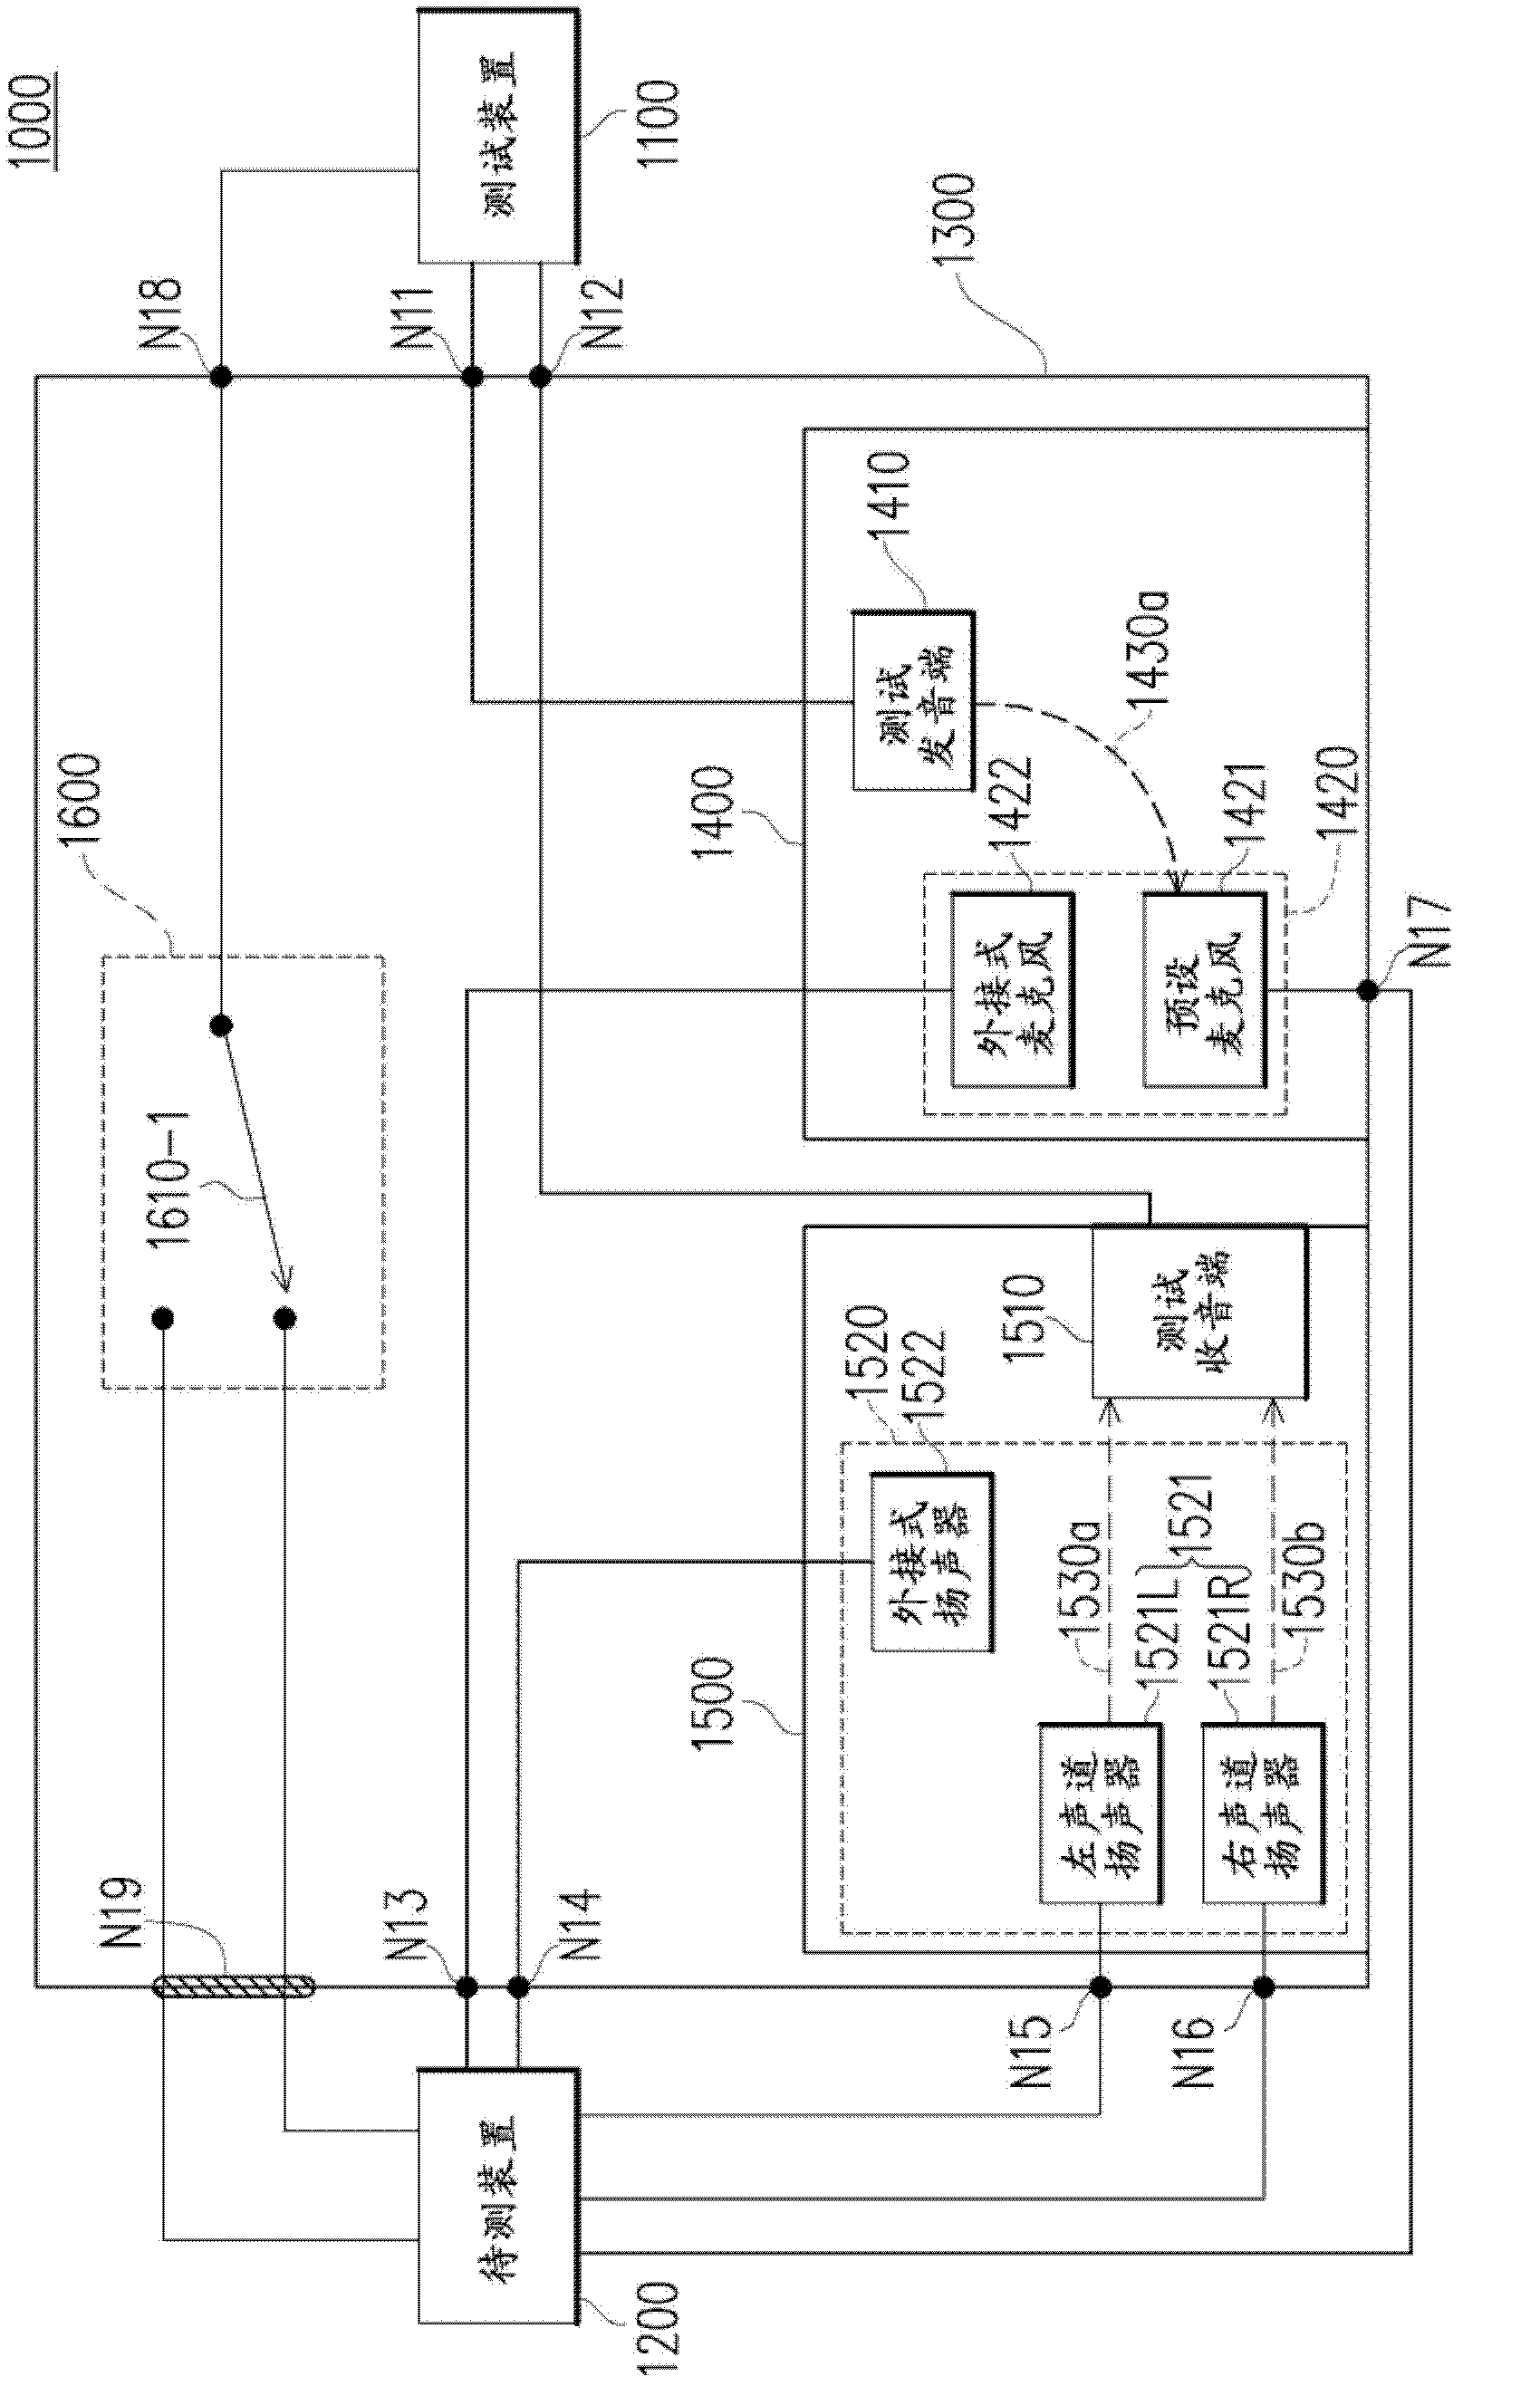 Audio test system and audio test method for to-be-tested device